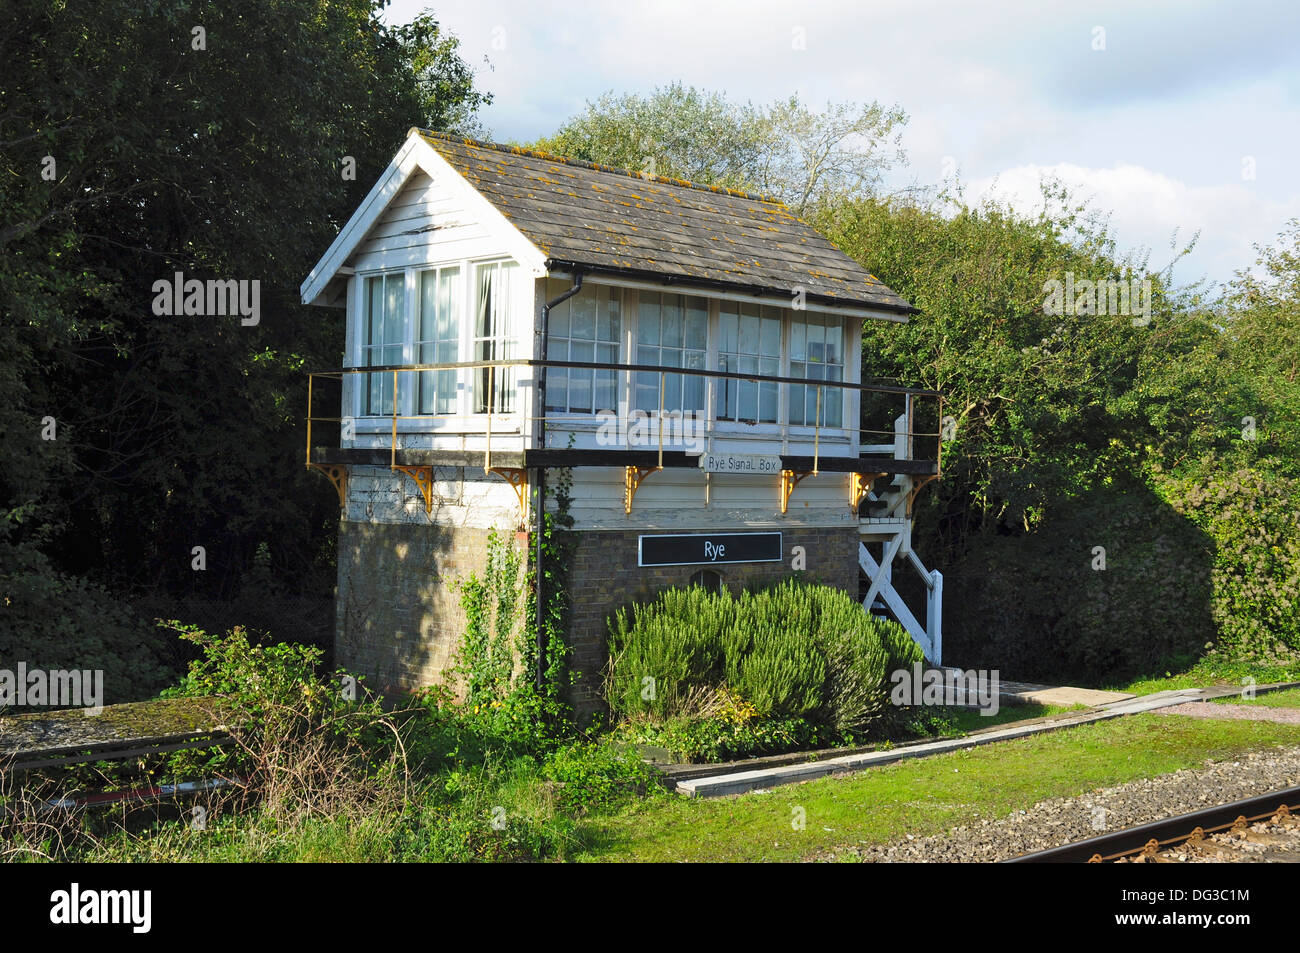 Old signal box at the railway station, Rye, East Sussex, England, UK Stock Photo